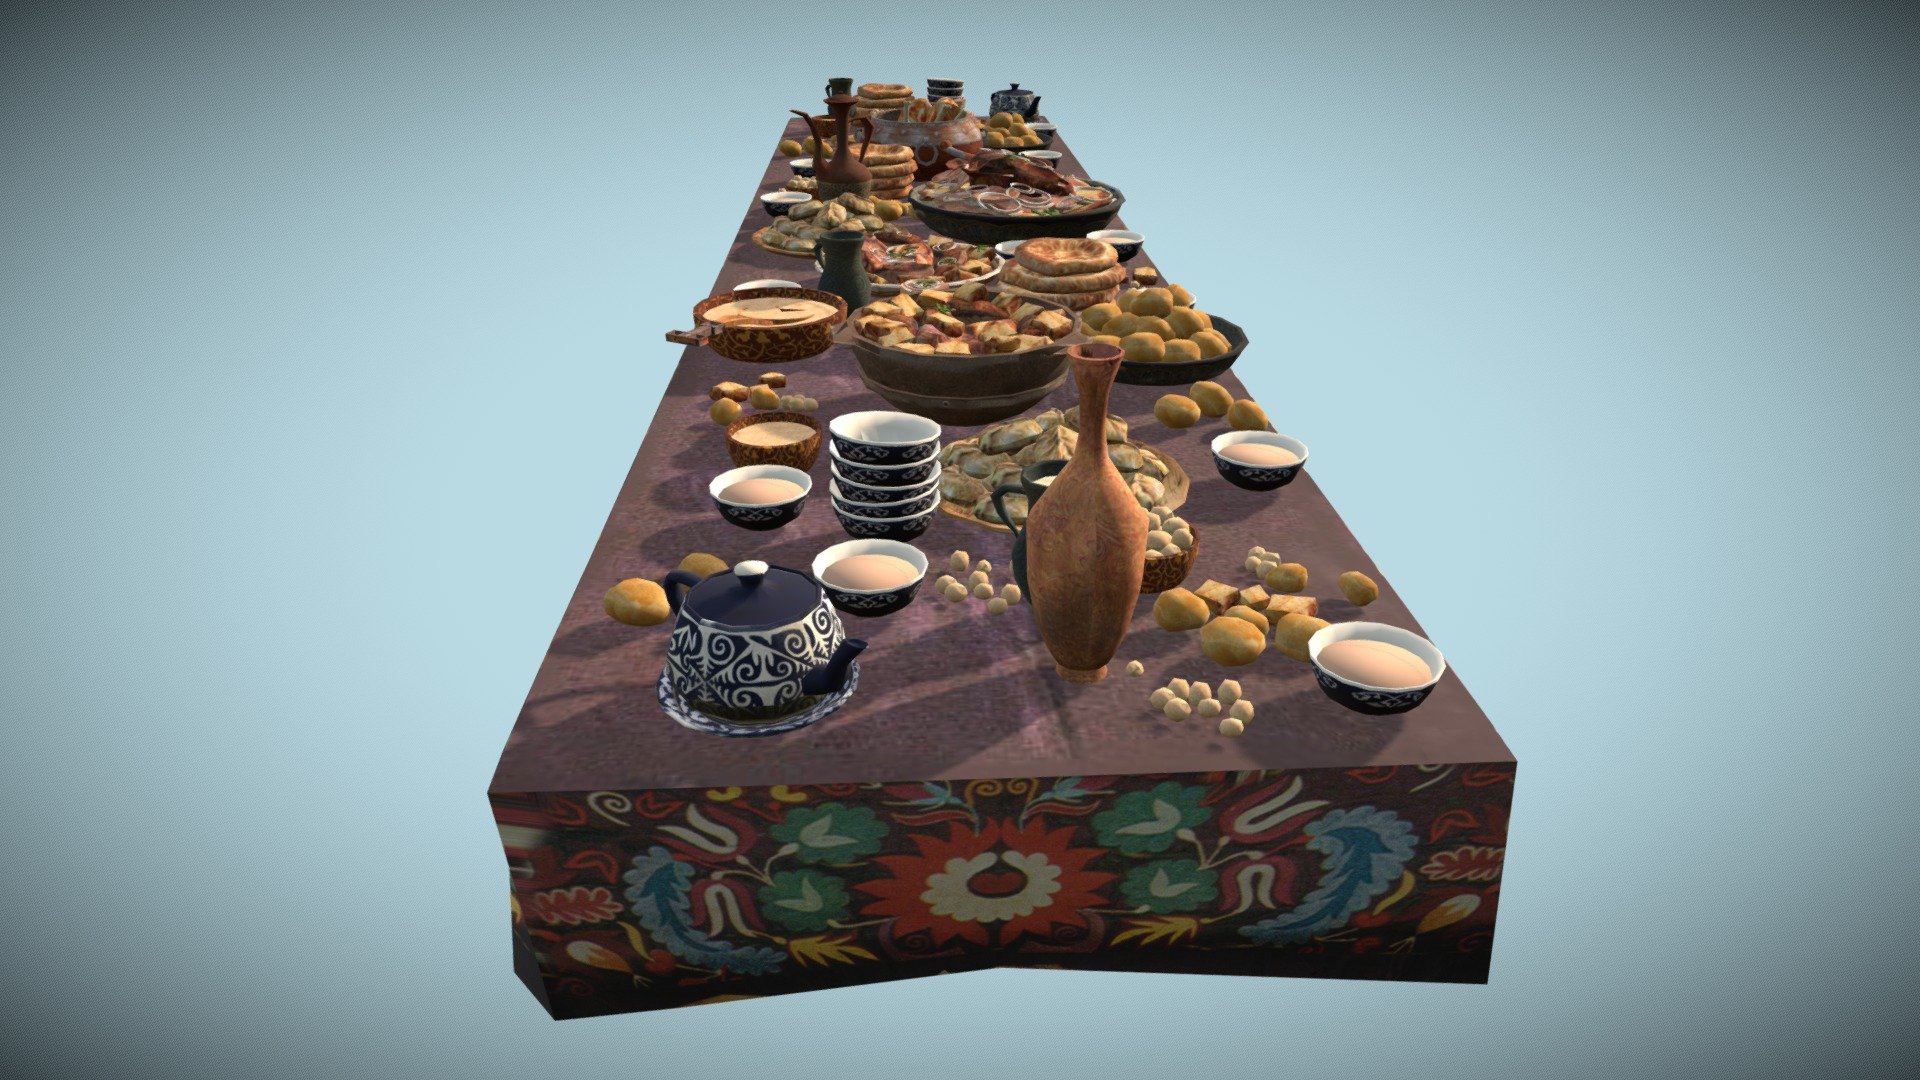 Table served for celebration.

Dastarkhan 3 - Low Poly Game Ready

Optimized for games (game ready), Suitable for close-UPS, illustrations and various renderings 3d model